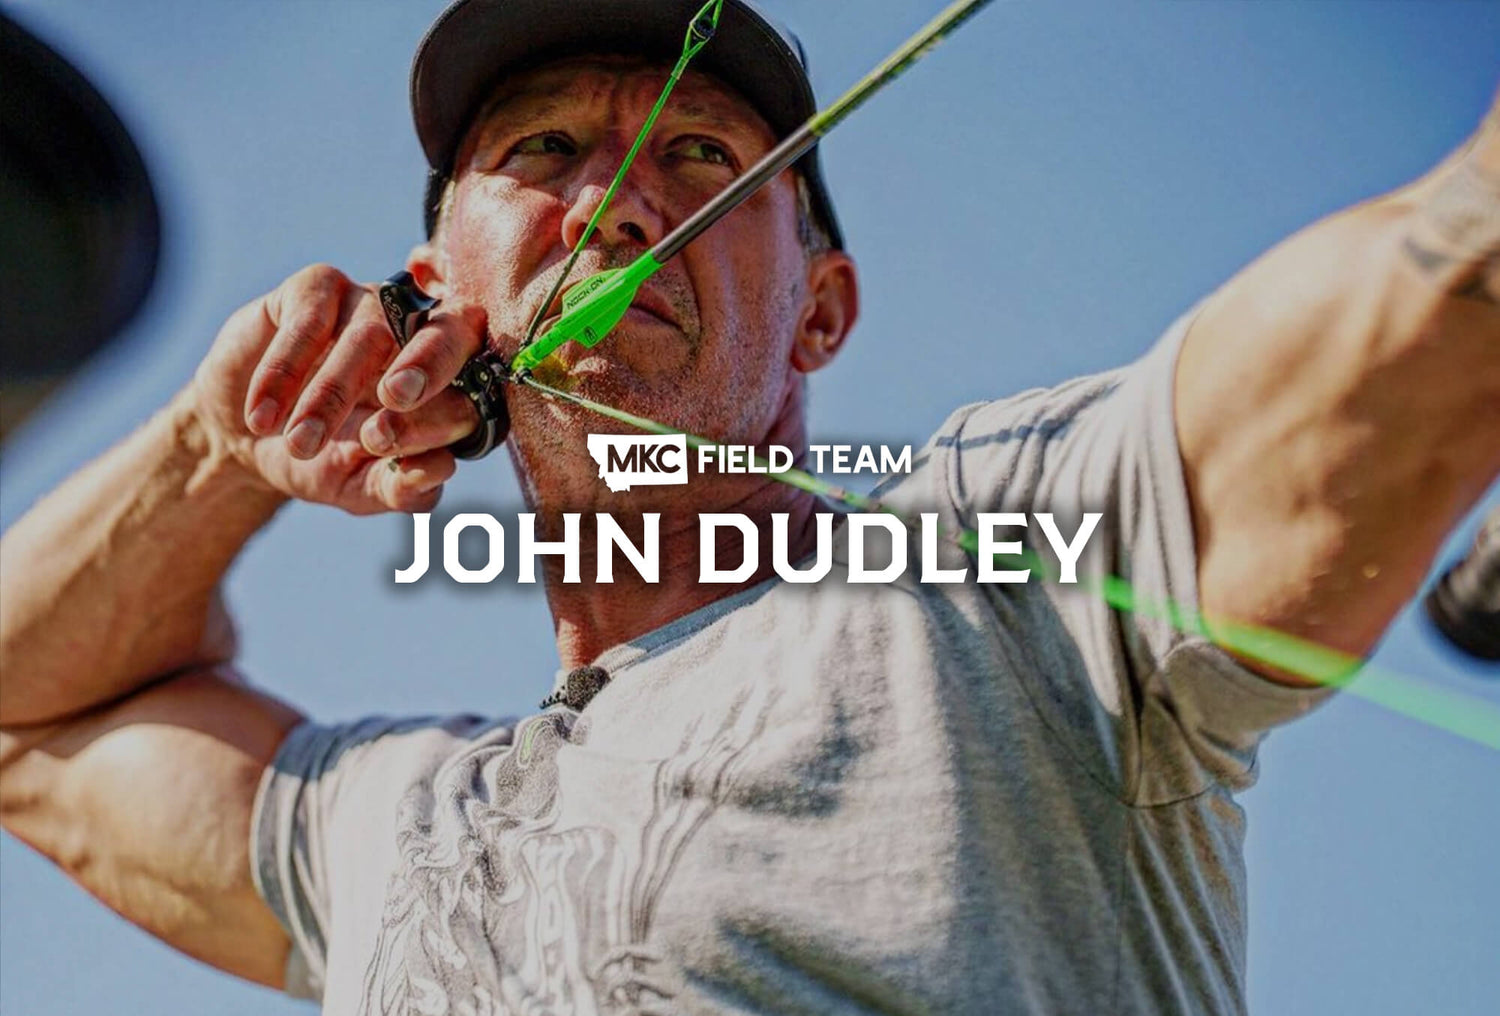 John Dudley stands looking intensely into the distance with an arrow nocked and bow drawn, ready to shoot.